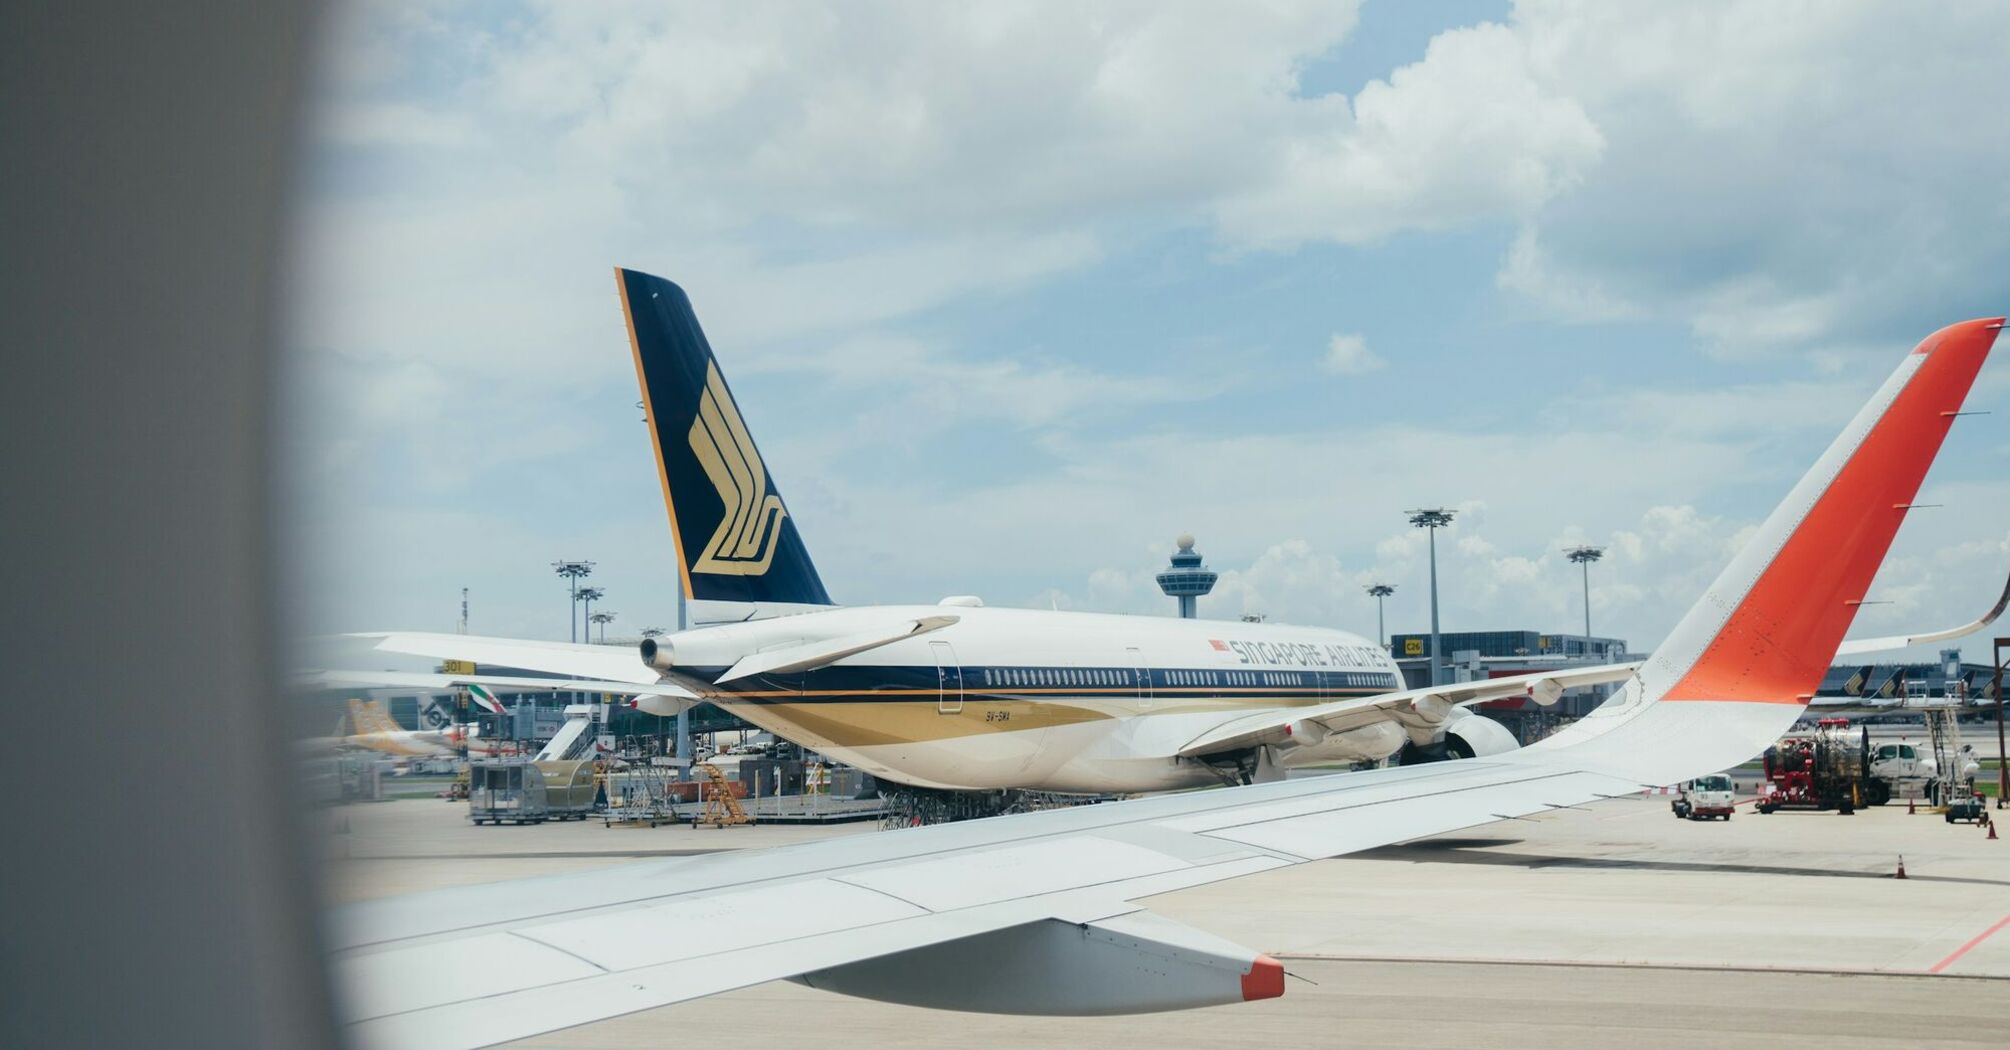 Singapore Airlines airplane at an airport